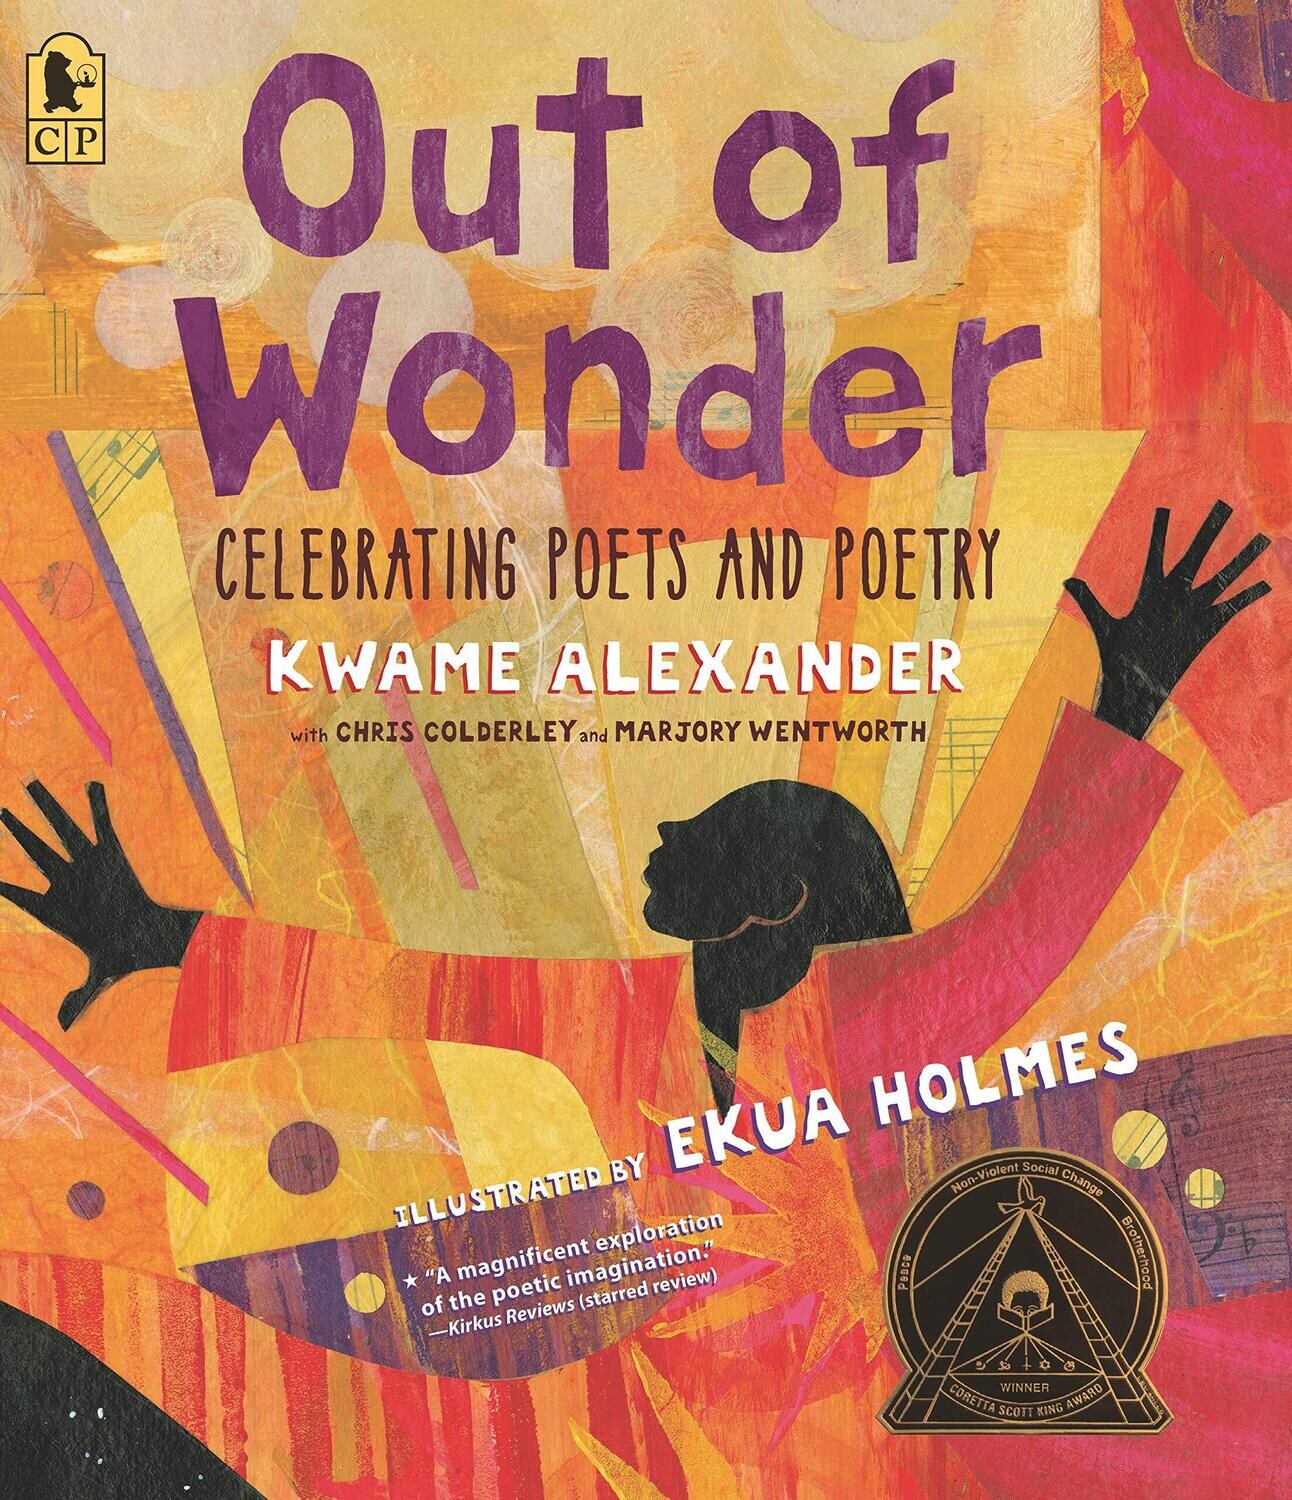 Out of Wonder: Celebrating Poets and Poetry by Kwame Alexander, Illustrated by Ekua Holmes